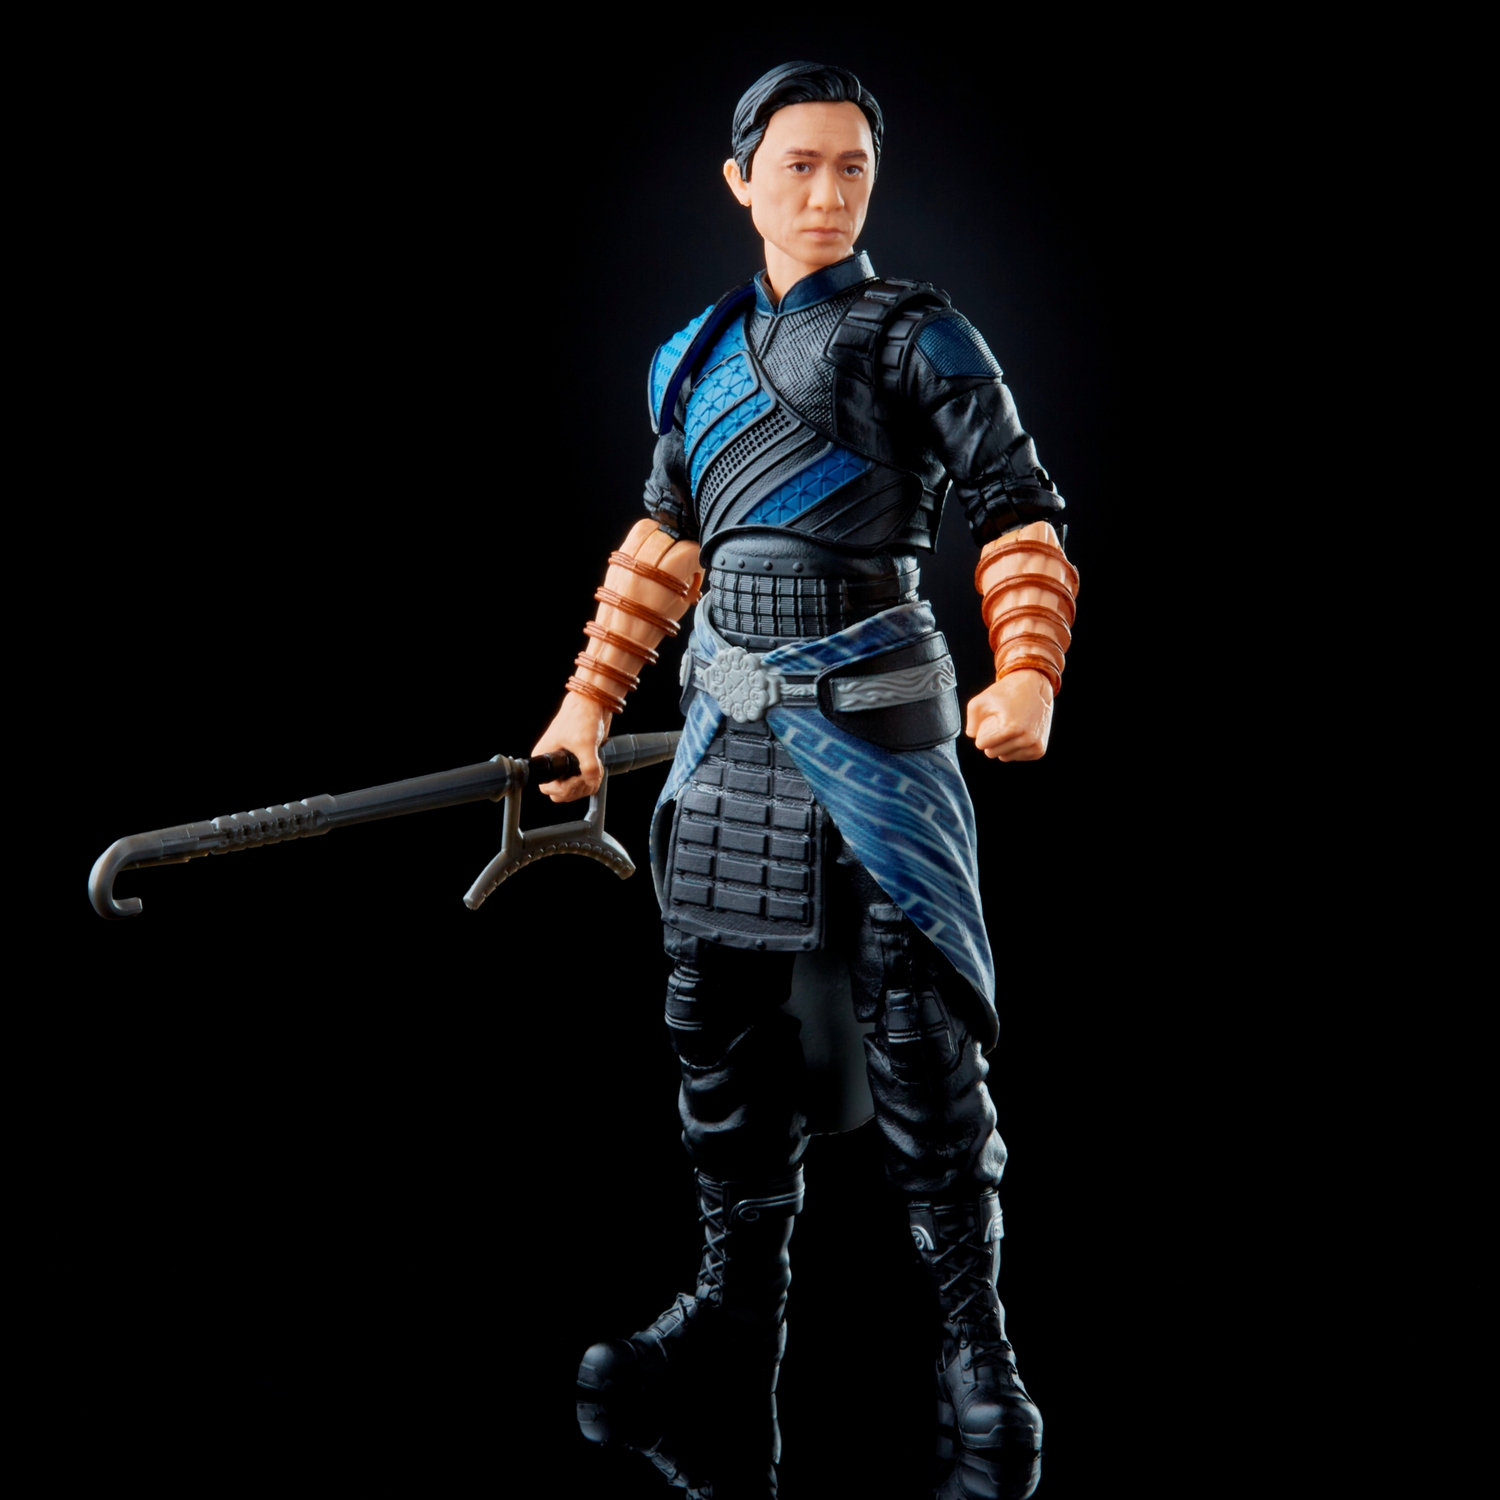 MARVEL LEGENDS SERIES 6-INCH SHANG-CHI AND THE LEGEND OF THE TEN RINGS - Wenwu oop1.jpg